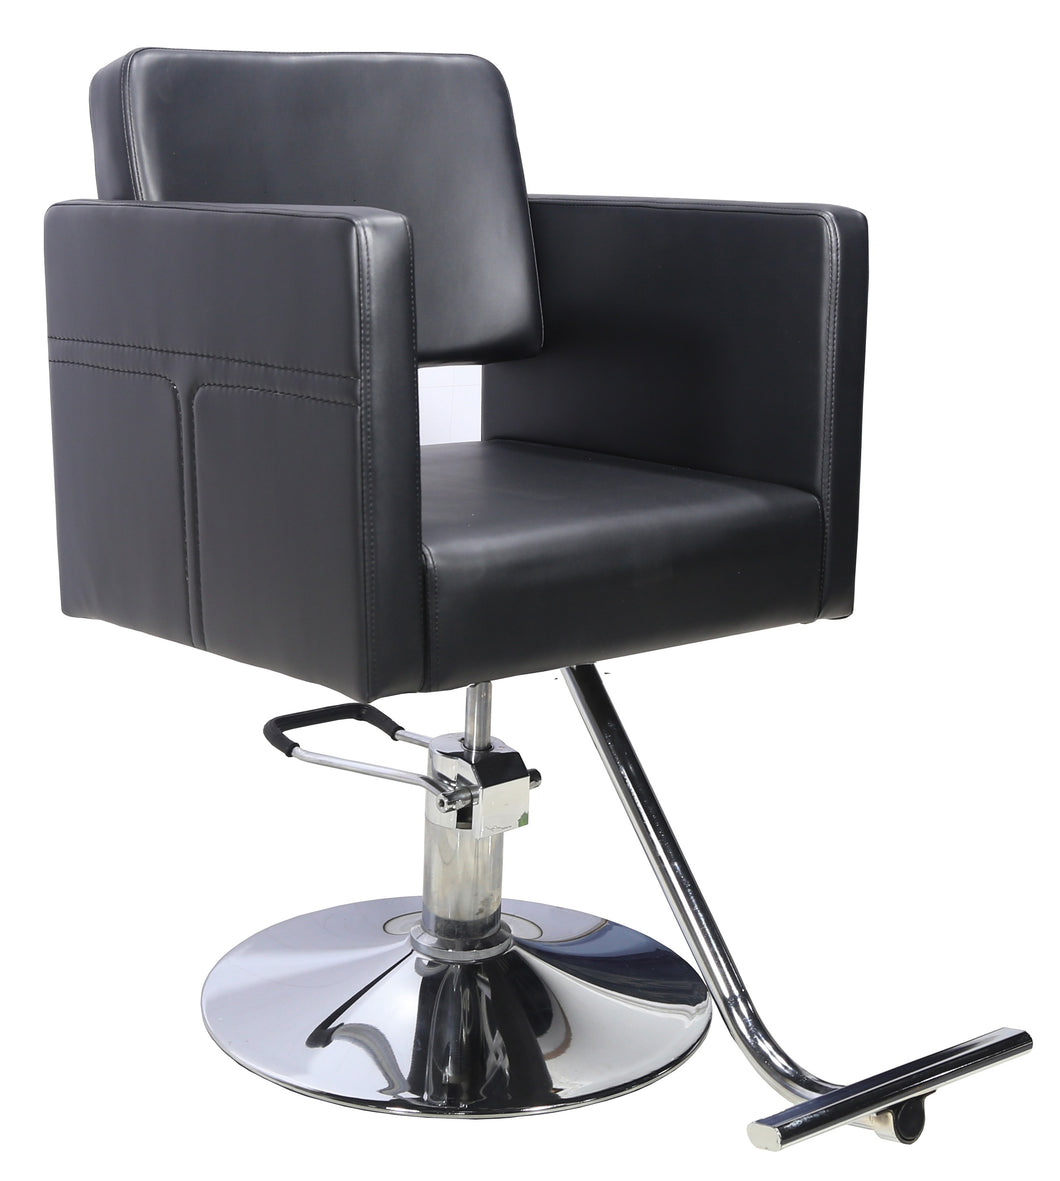 Model-647 Styling Chair